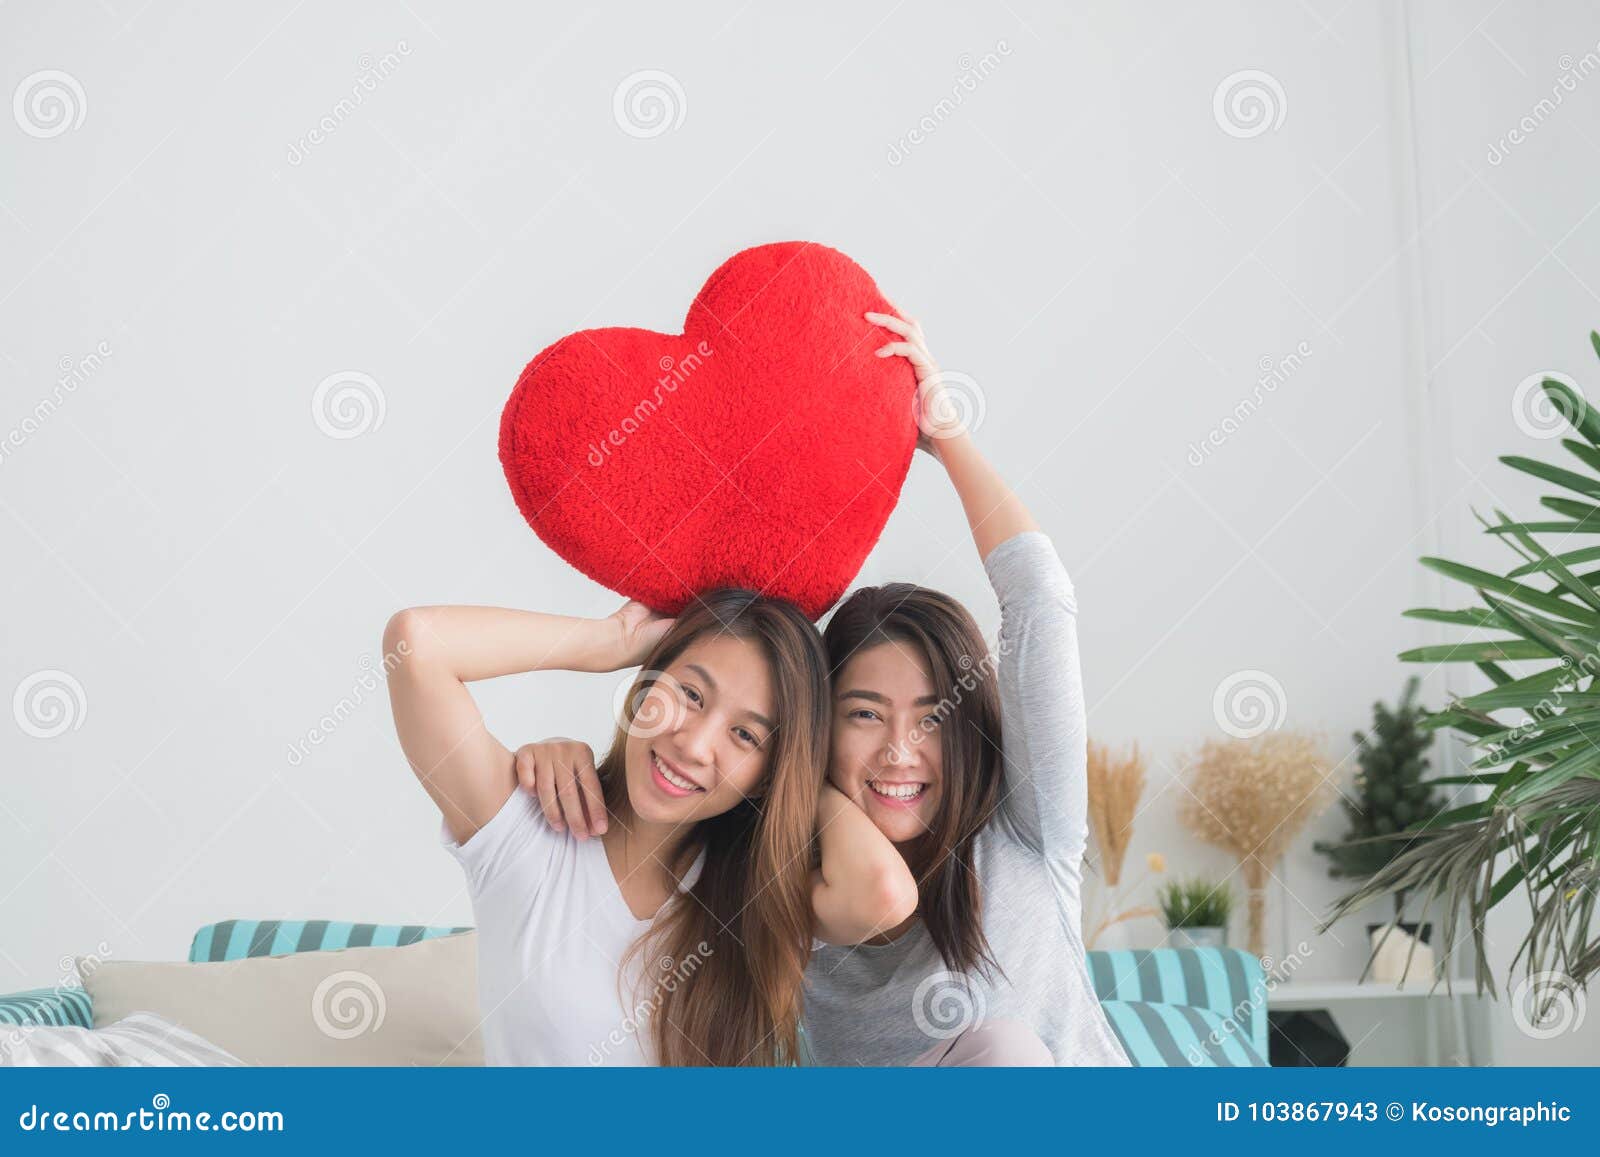 Lesbian Couple Together Concept Couple Of Young Women Holding P Stock